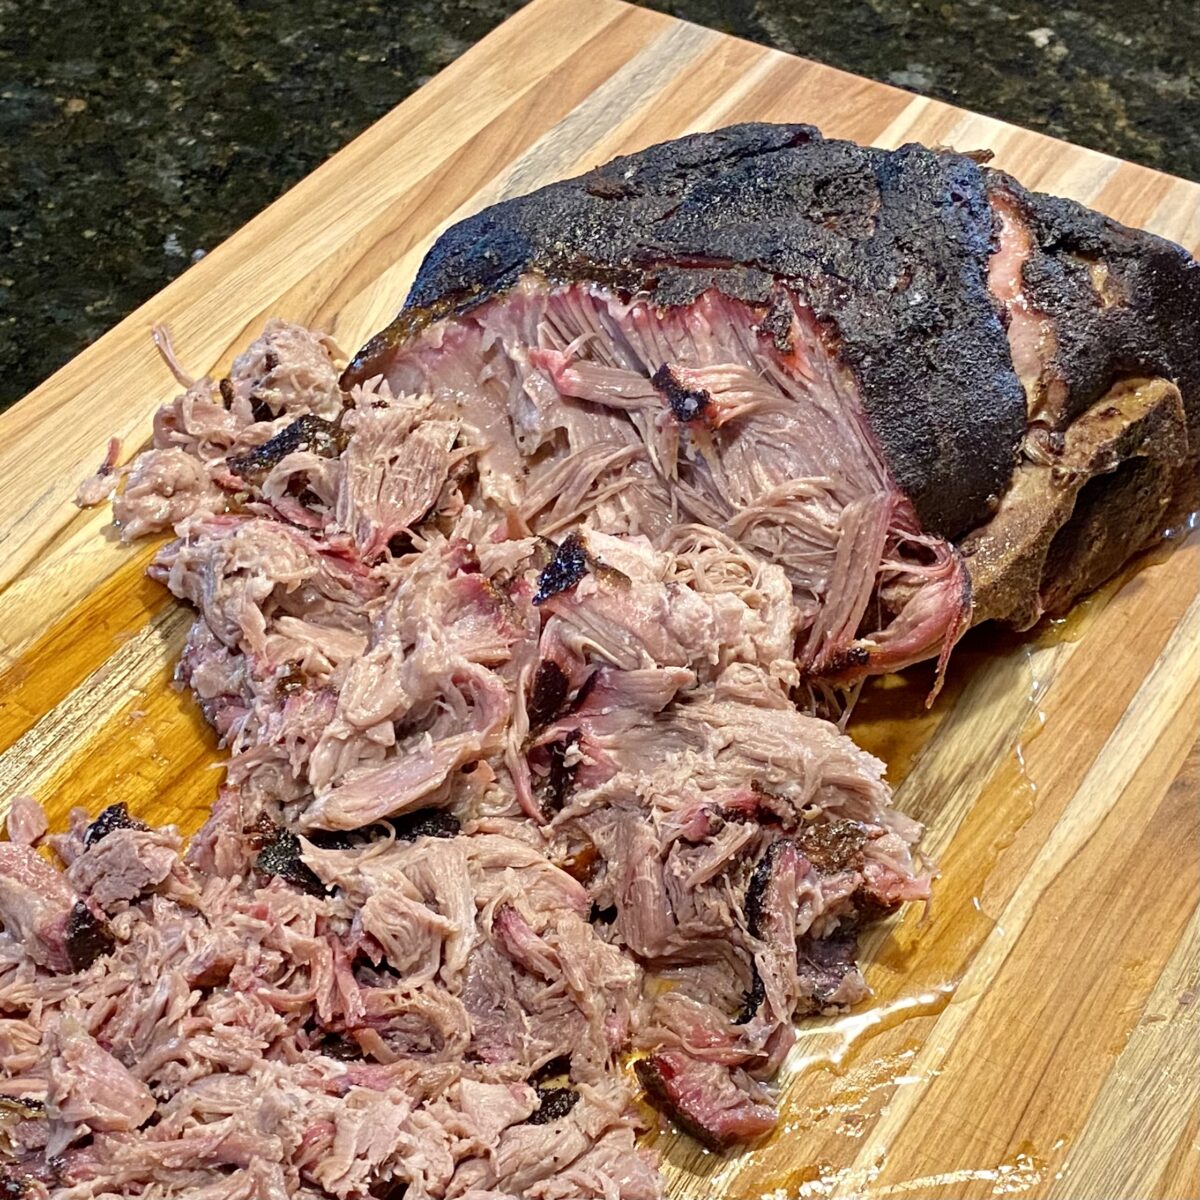 Side view of a smoked pork butt with half of it as pulled pork on a cutting board.  